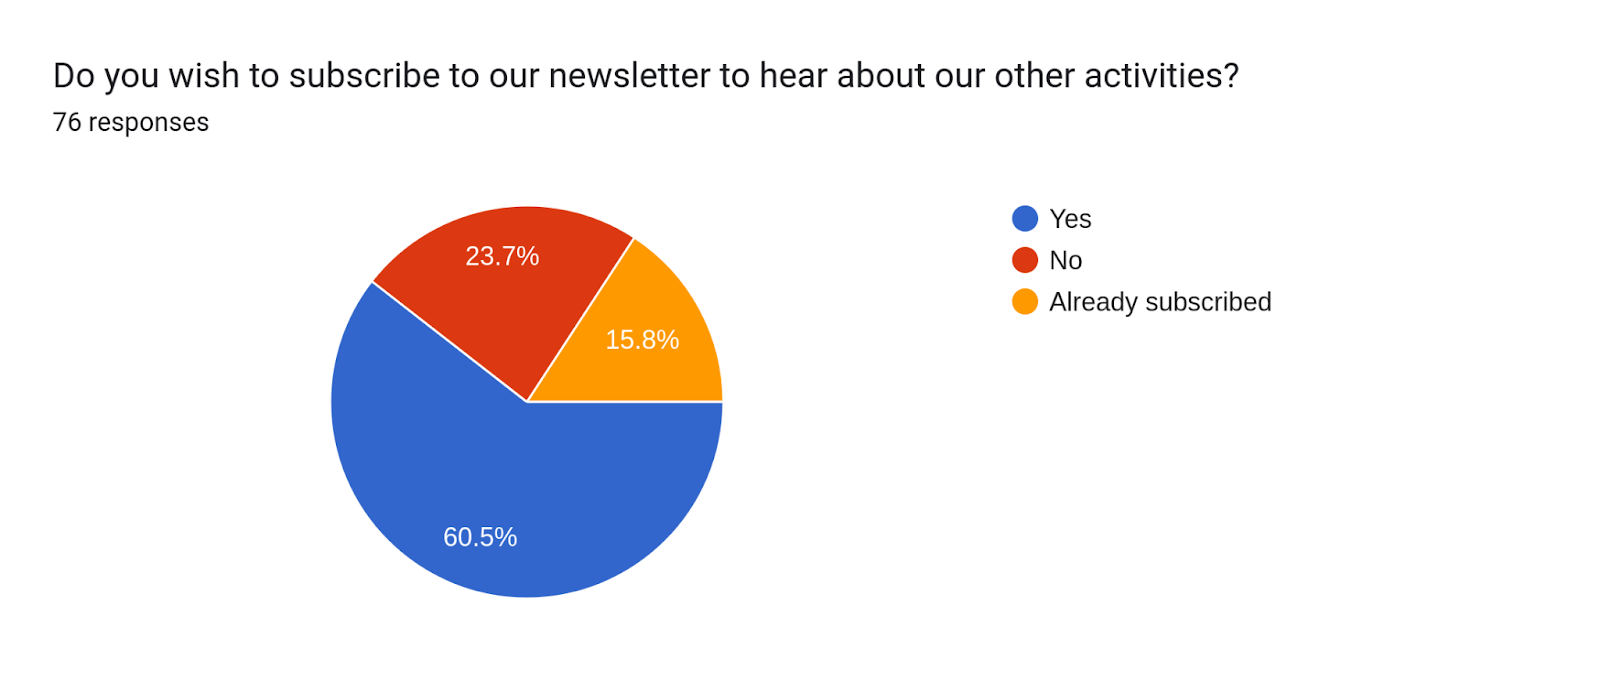 Forms response chart. Question title: Do you wish to subscribe to our newsletter to hear about our other activities?

. Number of responses: 76 responses.